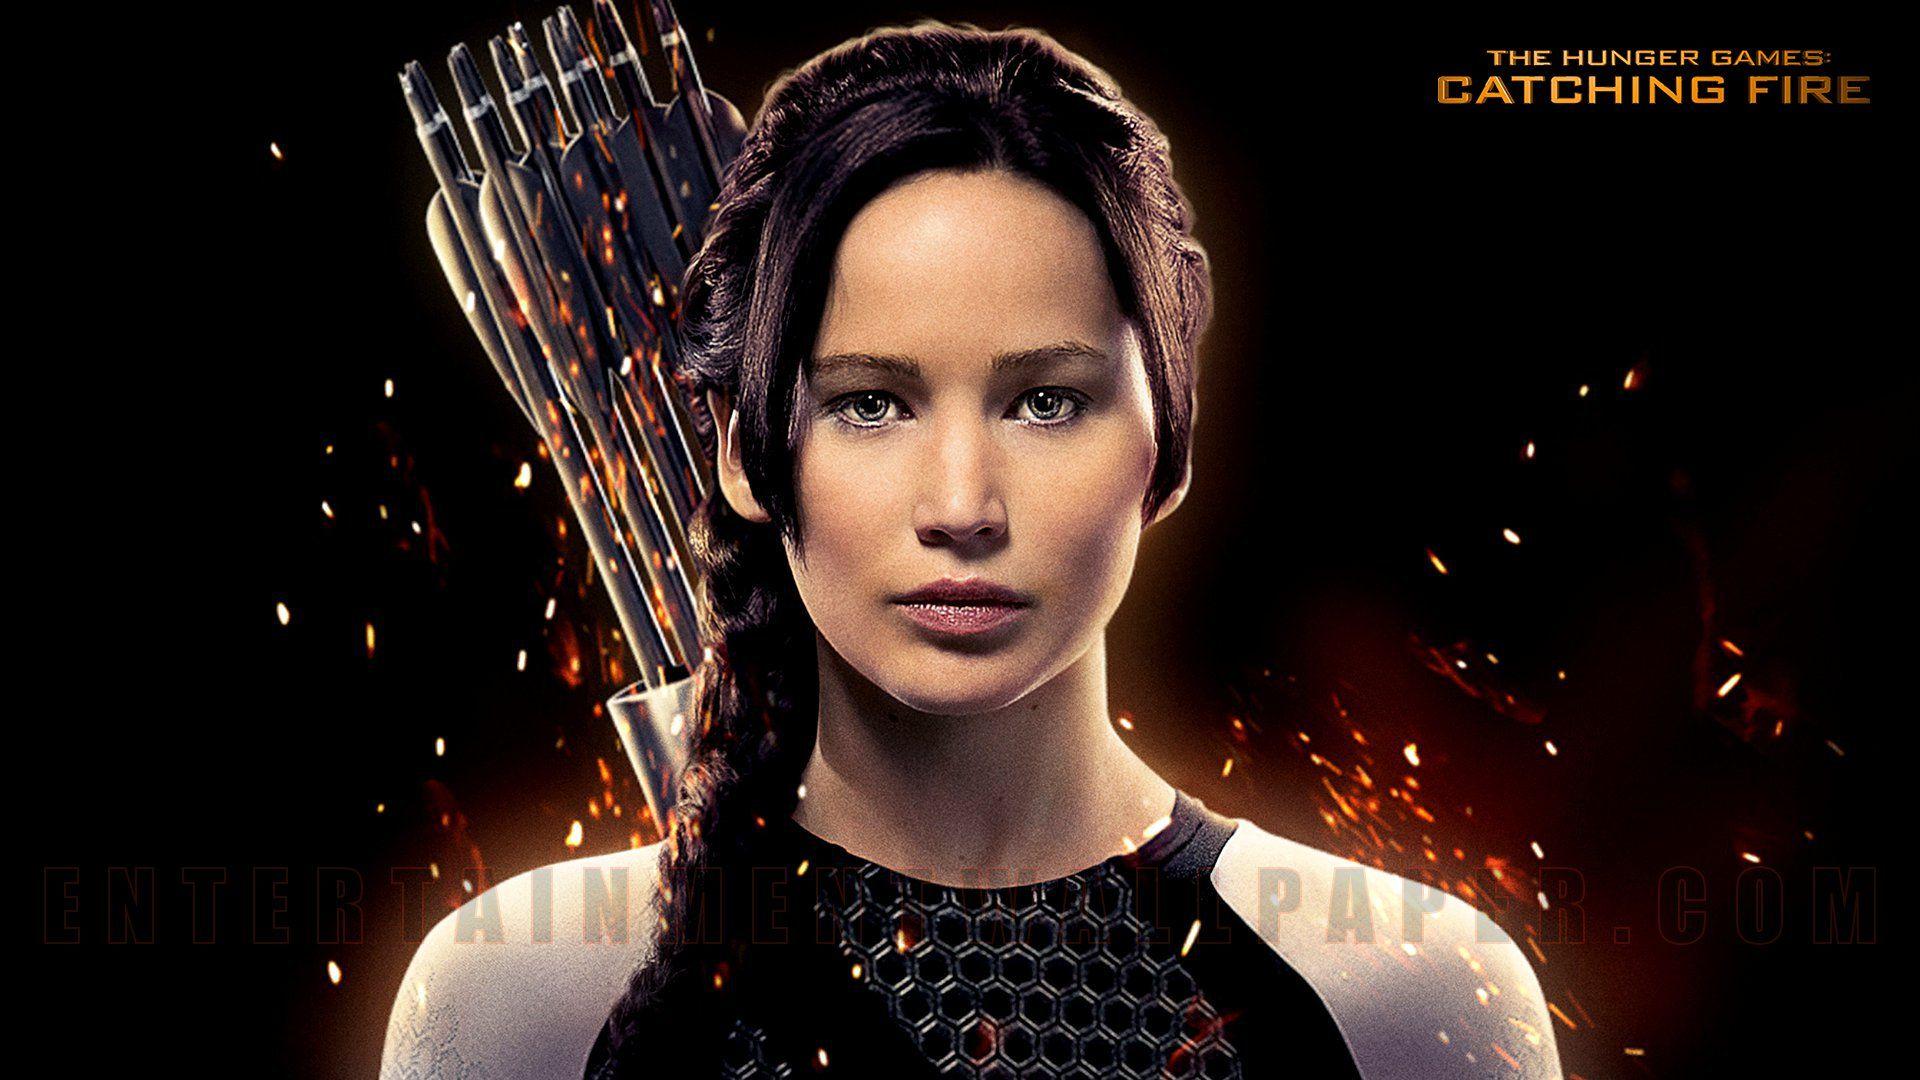 The Hunger Games: Catching Fire Wallpaper - 1920x1080